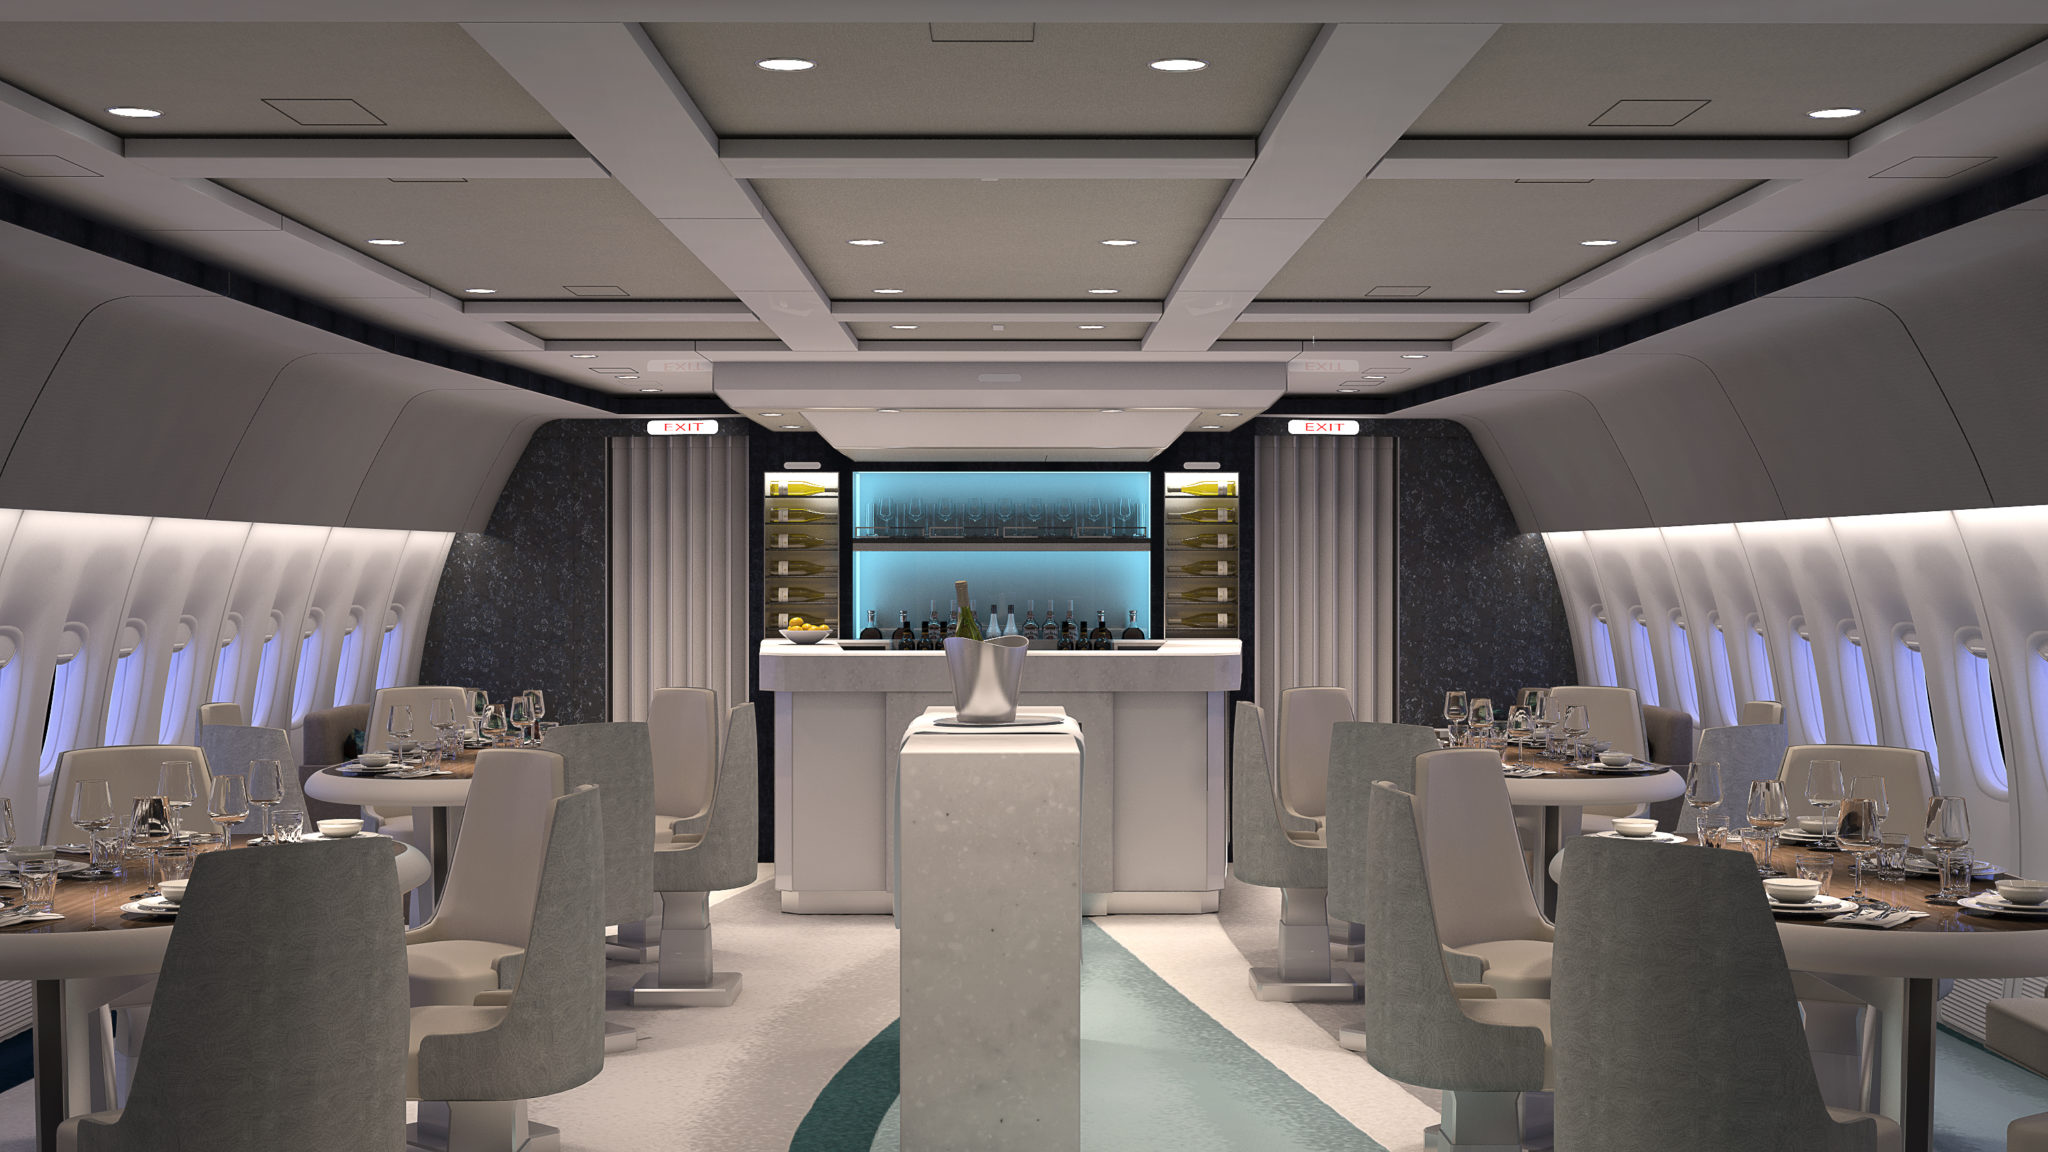 The Peninsula Grand Inaugural Crystal AirCruise: An Elevated Experience